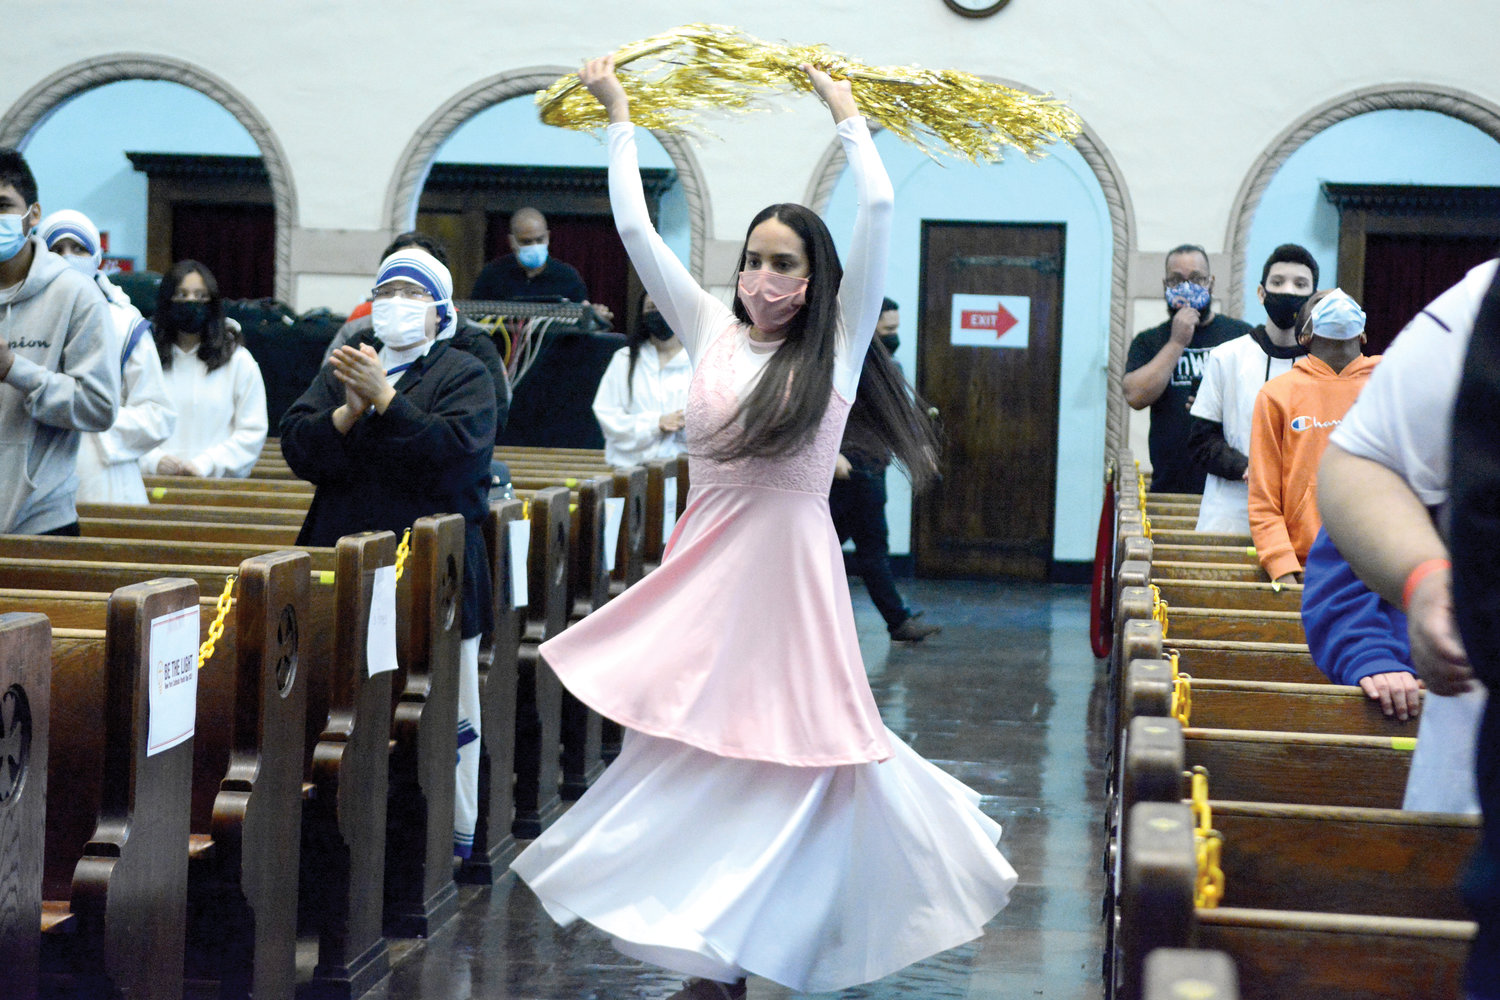 A dancer from the Mater Dei Dance Ministry performs.